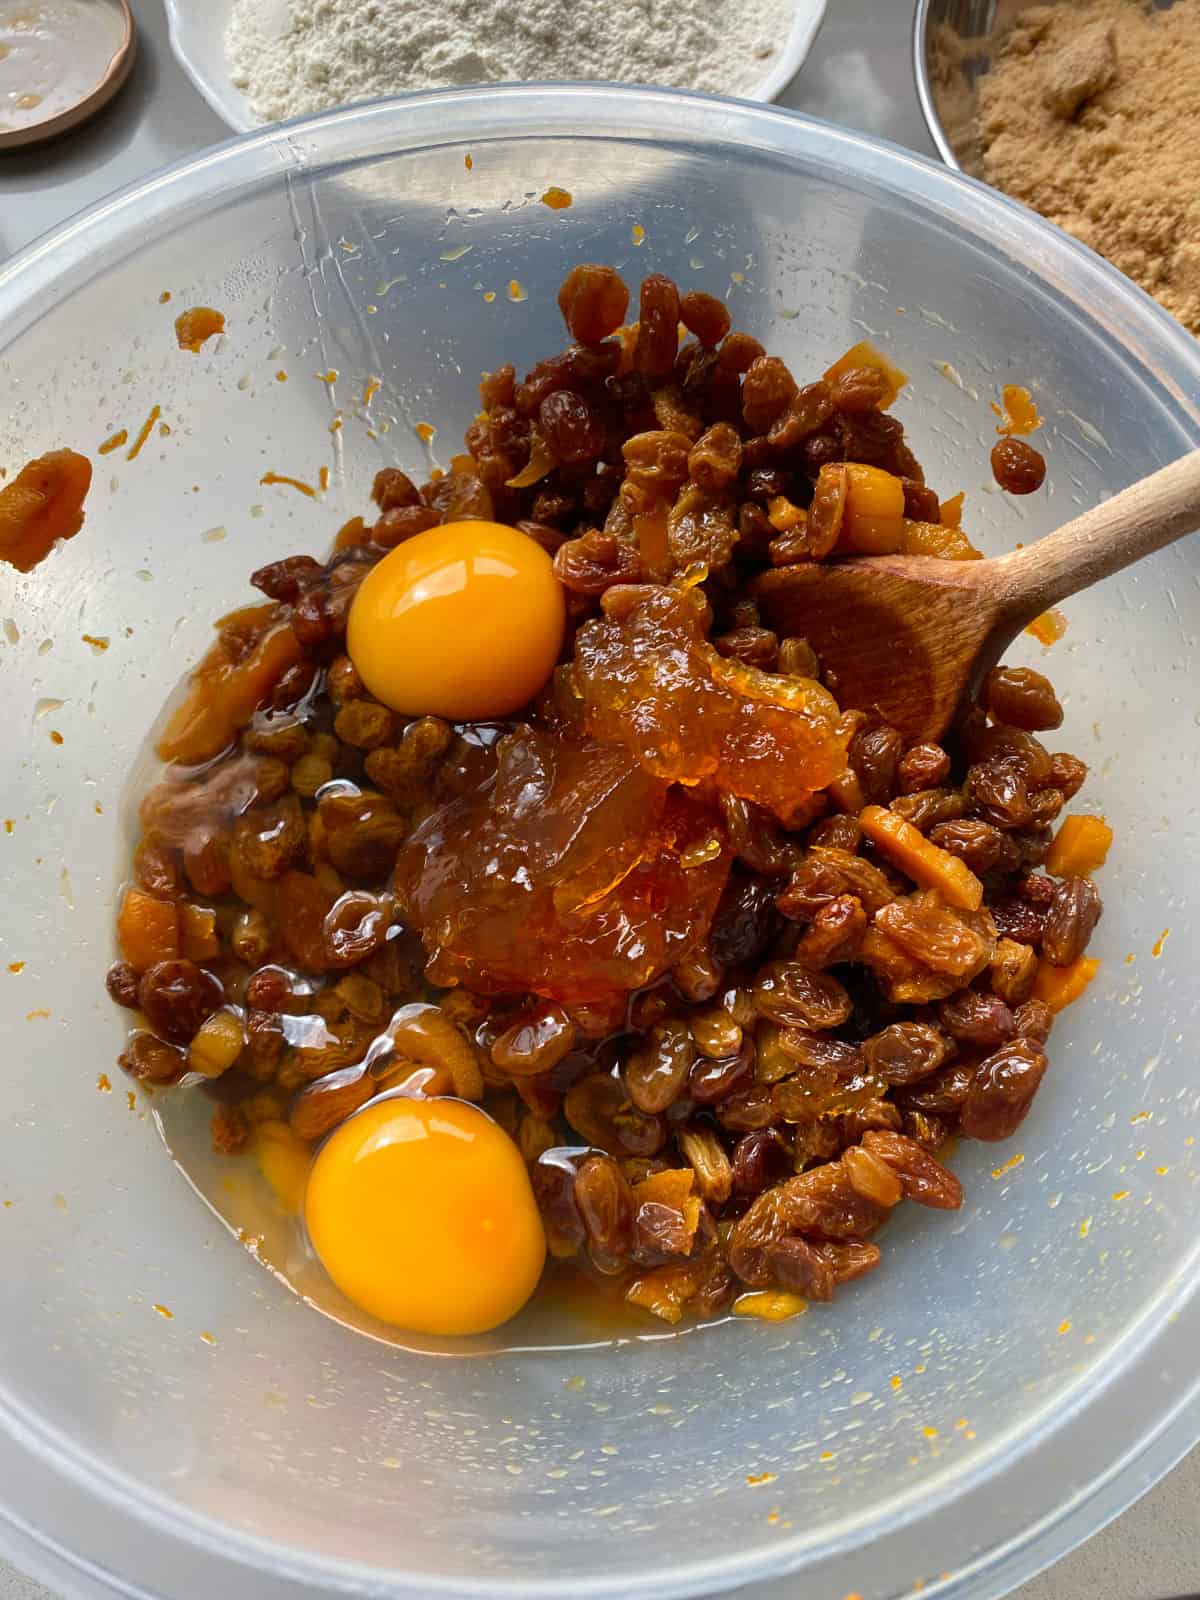 Soaking friend fruit, cracked eggs and a dollop of marmalade in a large mixing bowl.